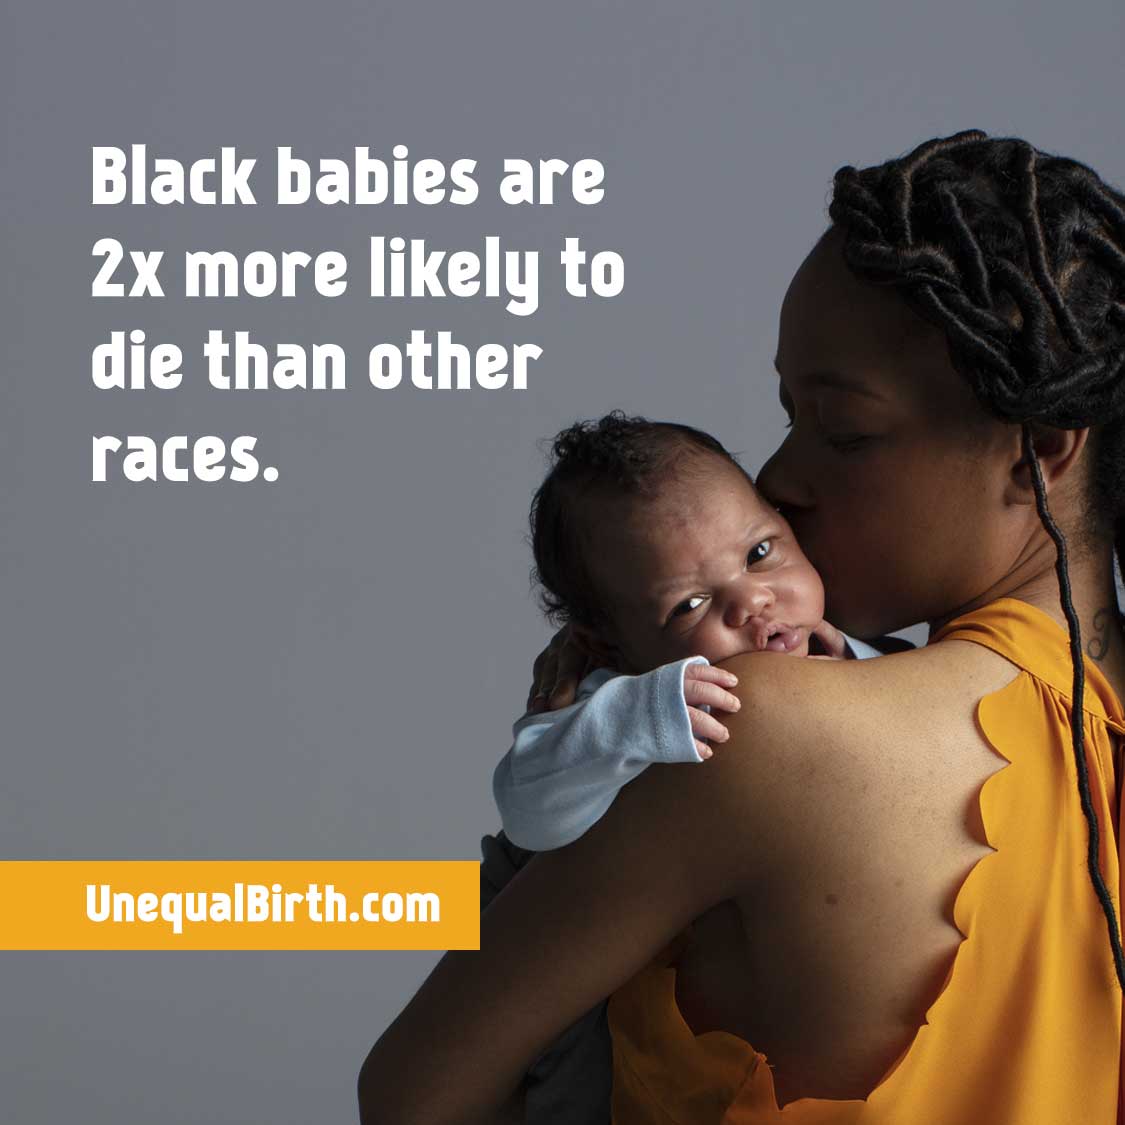 An image of a Black mother holding her baby featuring the text, "Black babies are 2x more likely to die than other races." and the website UnequalBirths.com